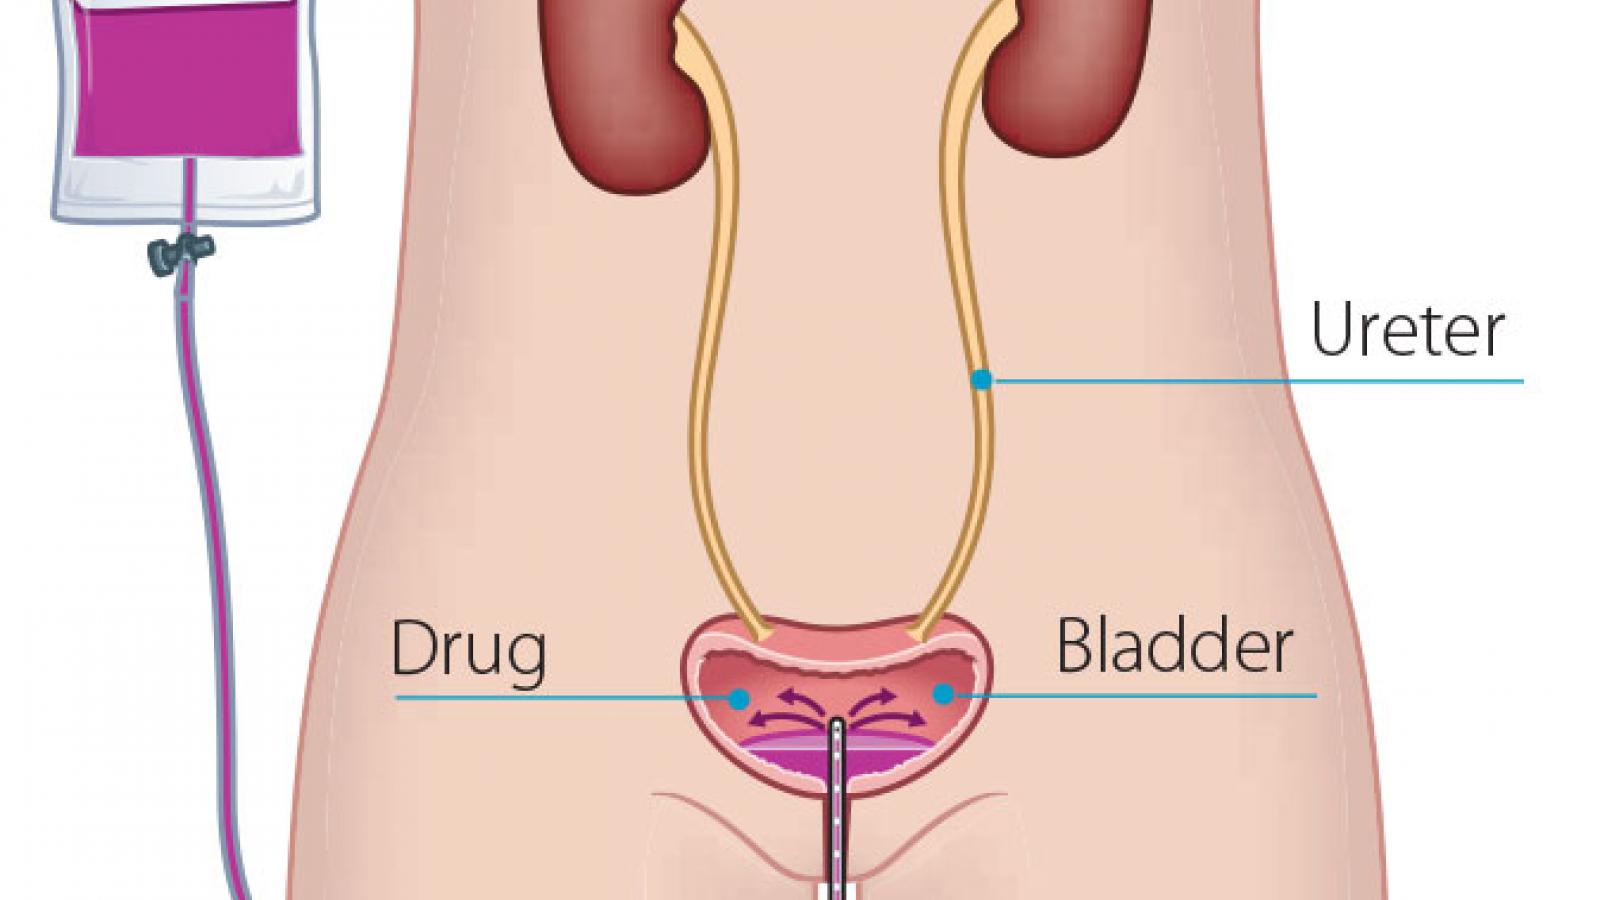 Giving drugs into the bladder